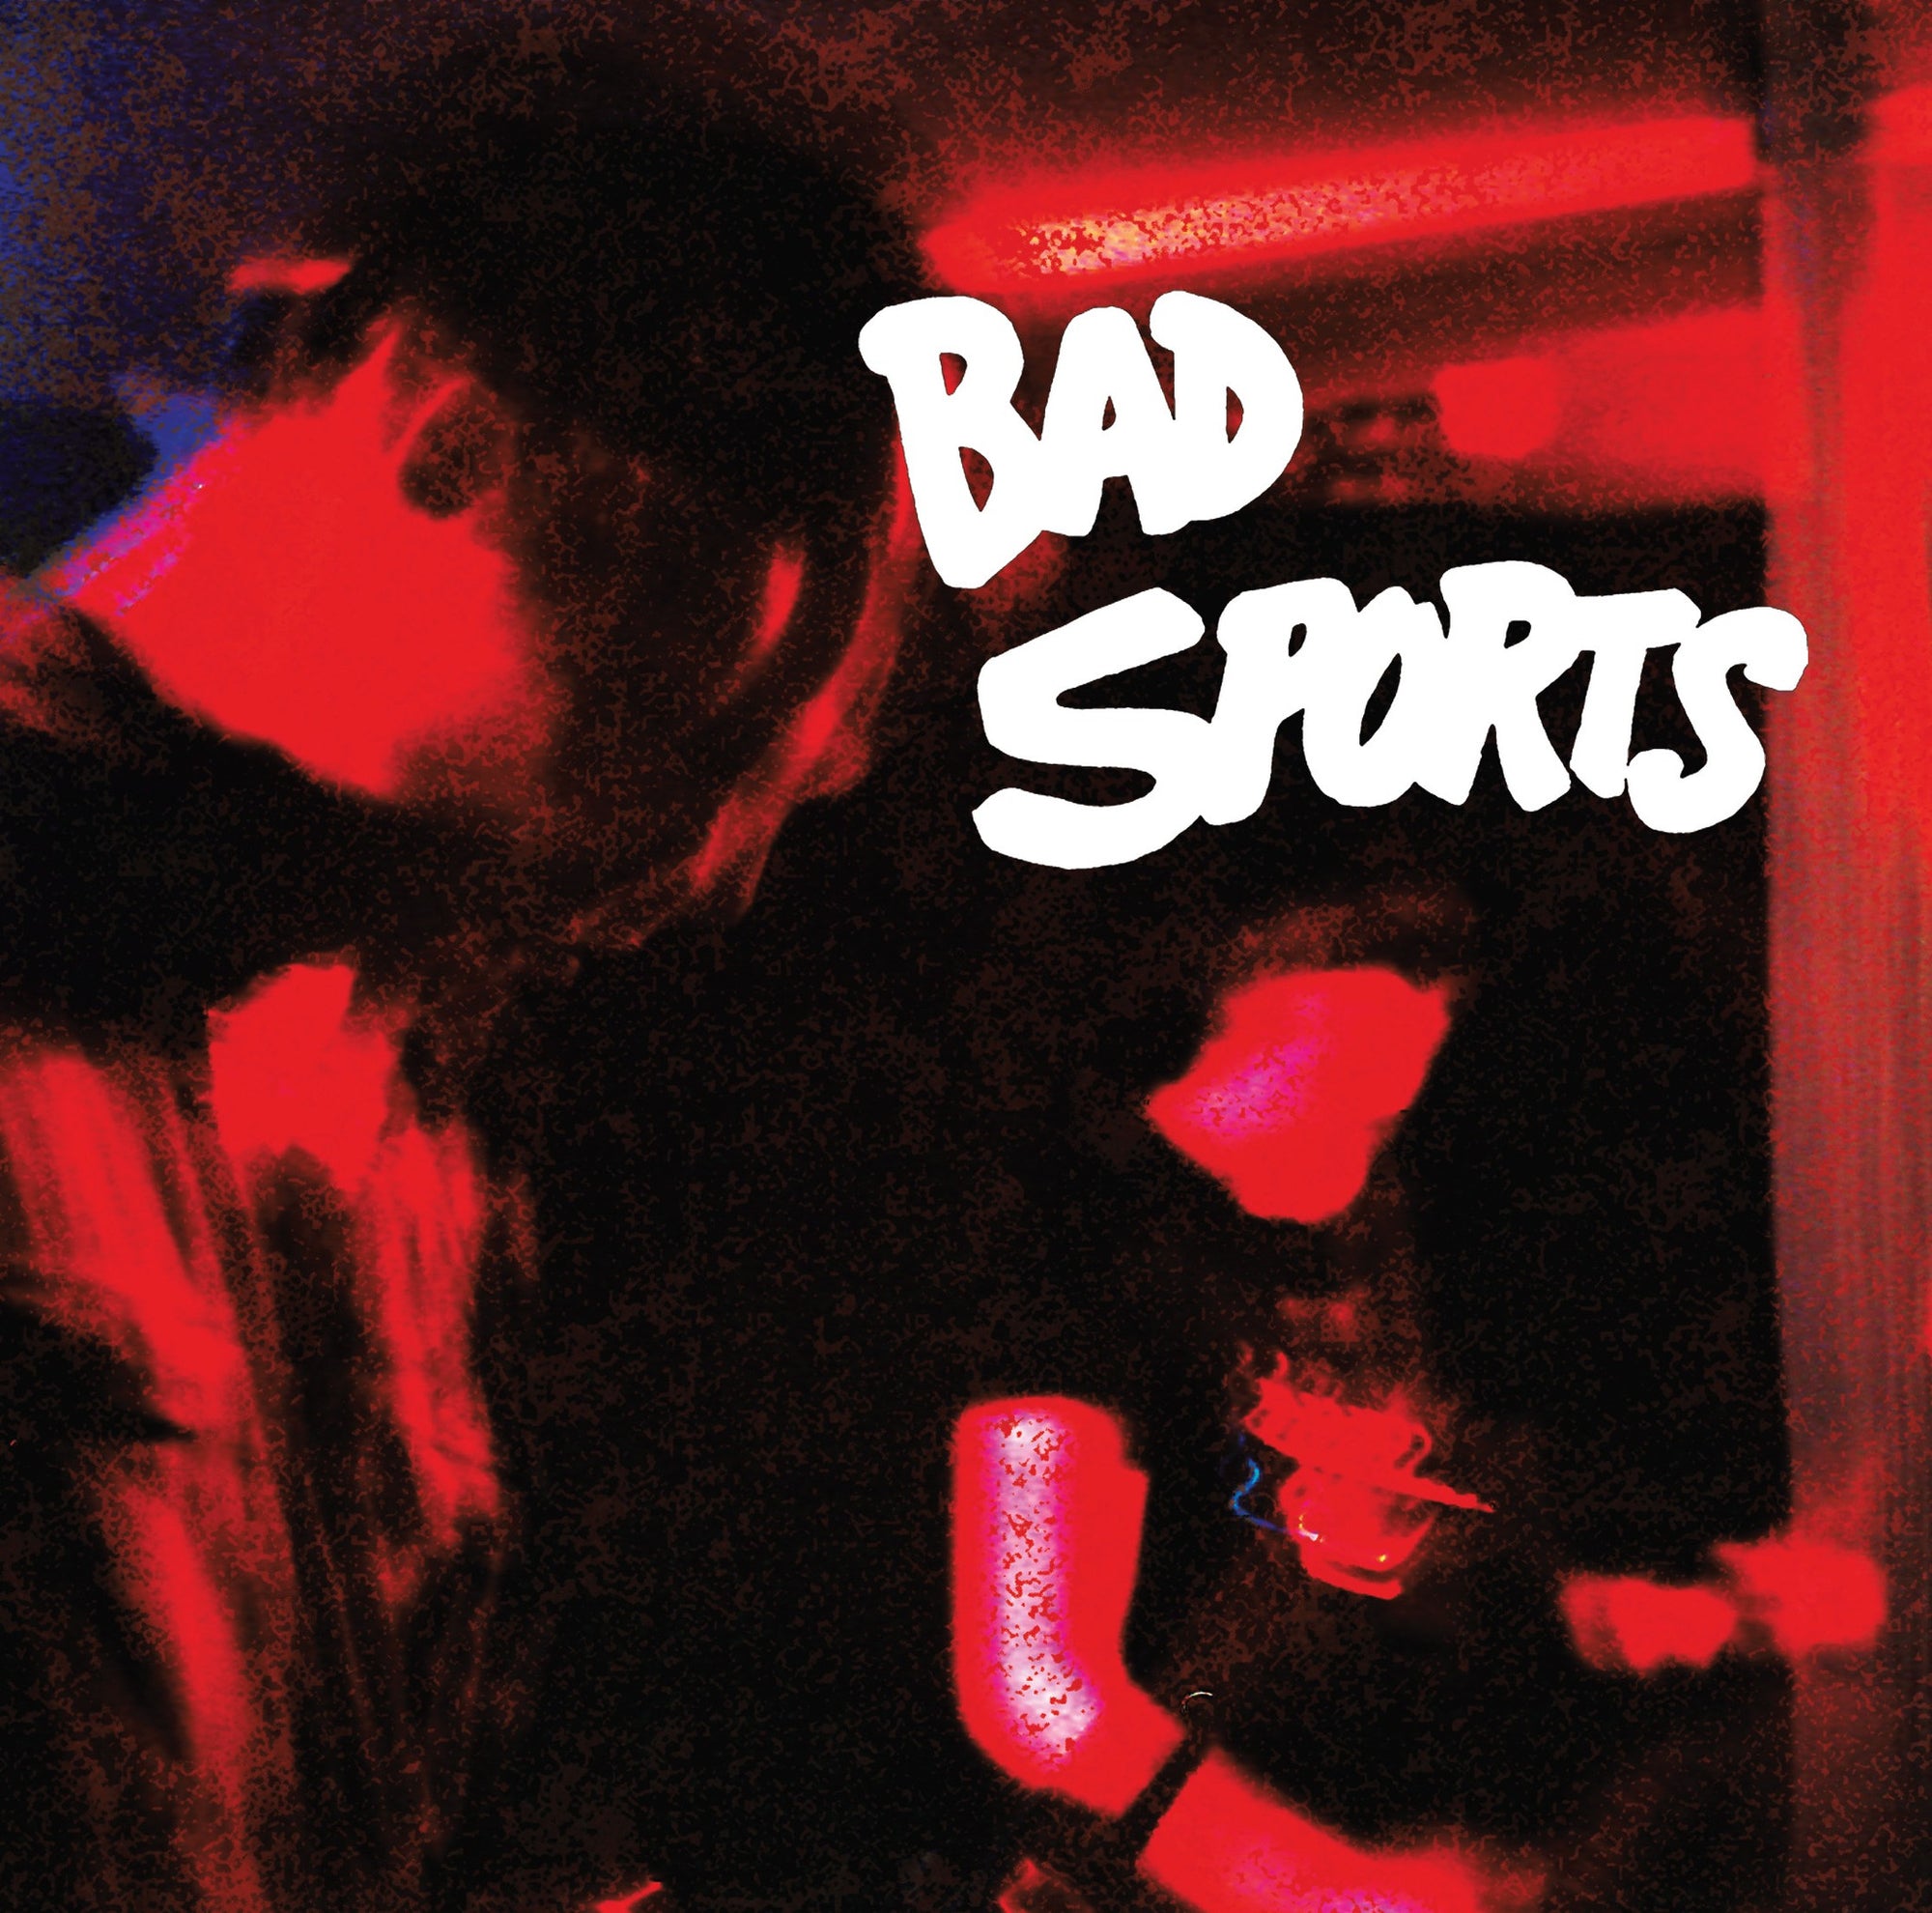 Bad Sports- Red Overlay 7” ~EX WAX MUSEUMS! - Total BS - Dead Beat Records